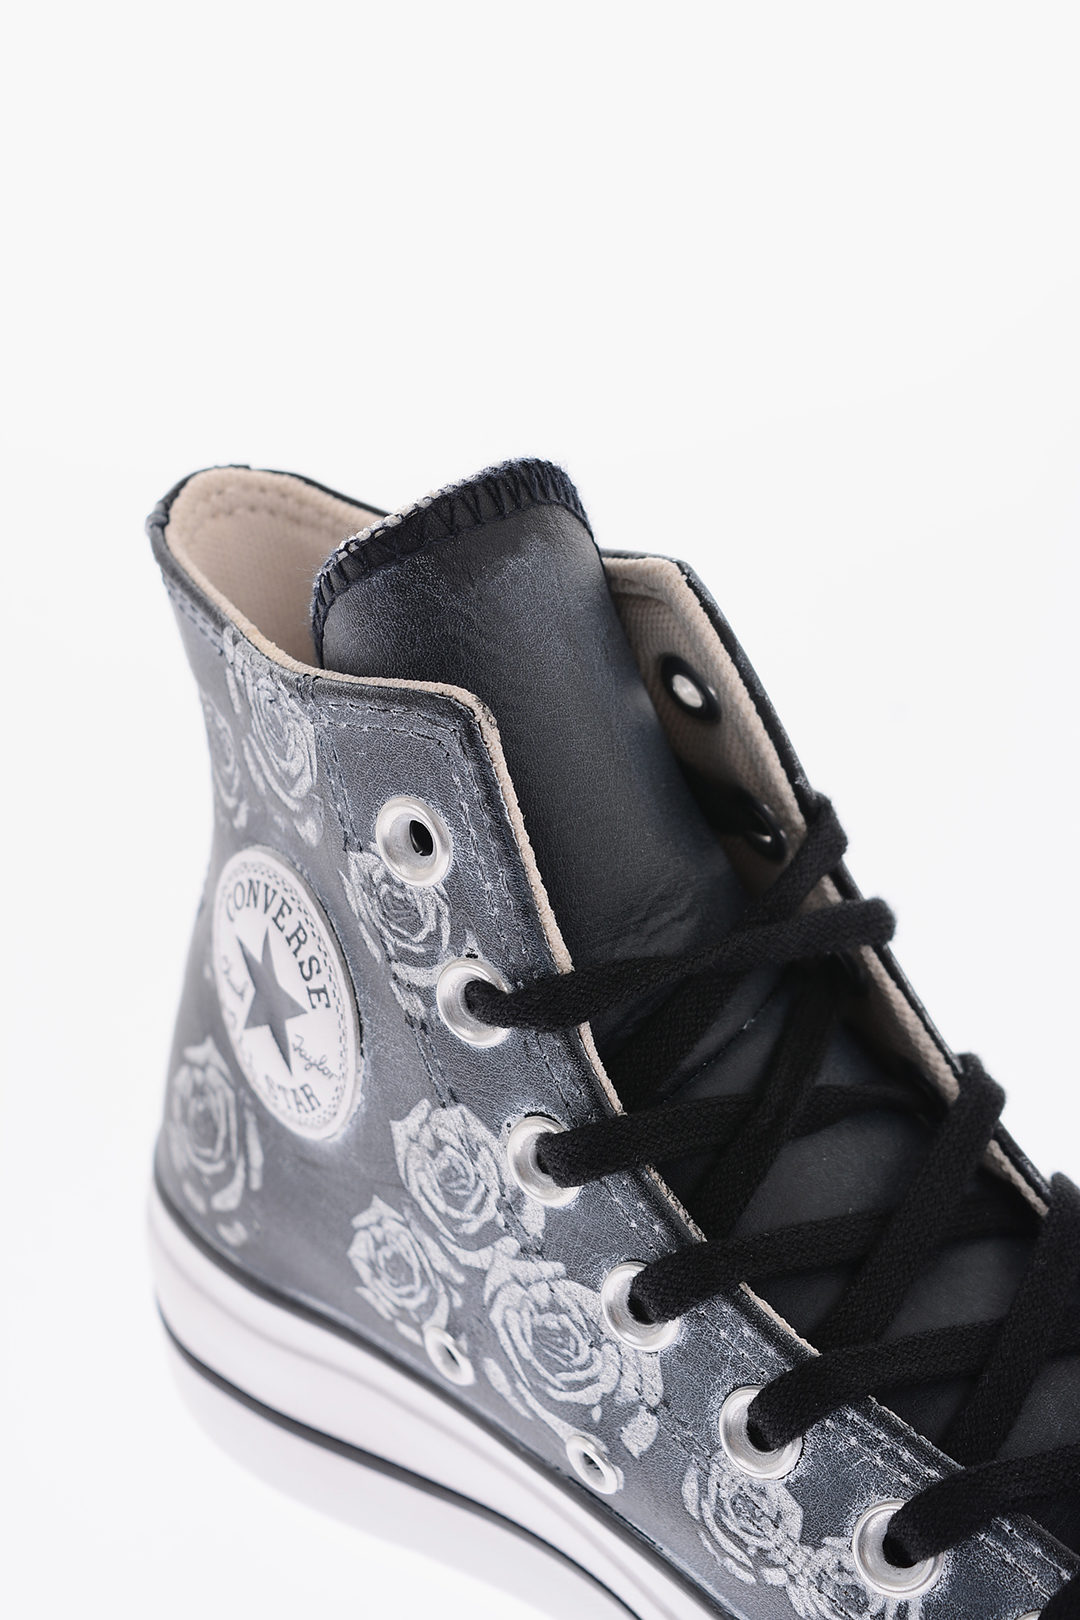 Converse ALL CHUCK TAYLOR 4cm Floral Patterned Leather High Top Sneakers with Platform damen - Glamood Outlet